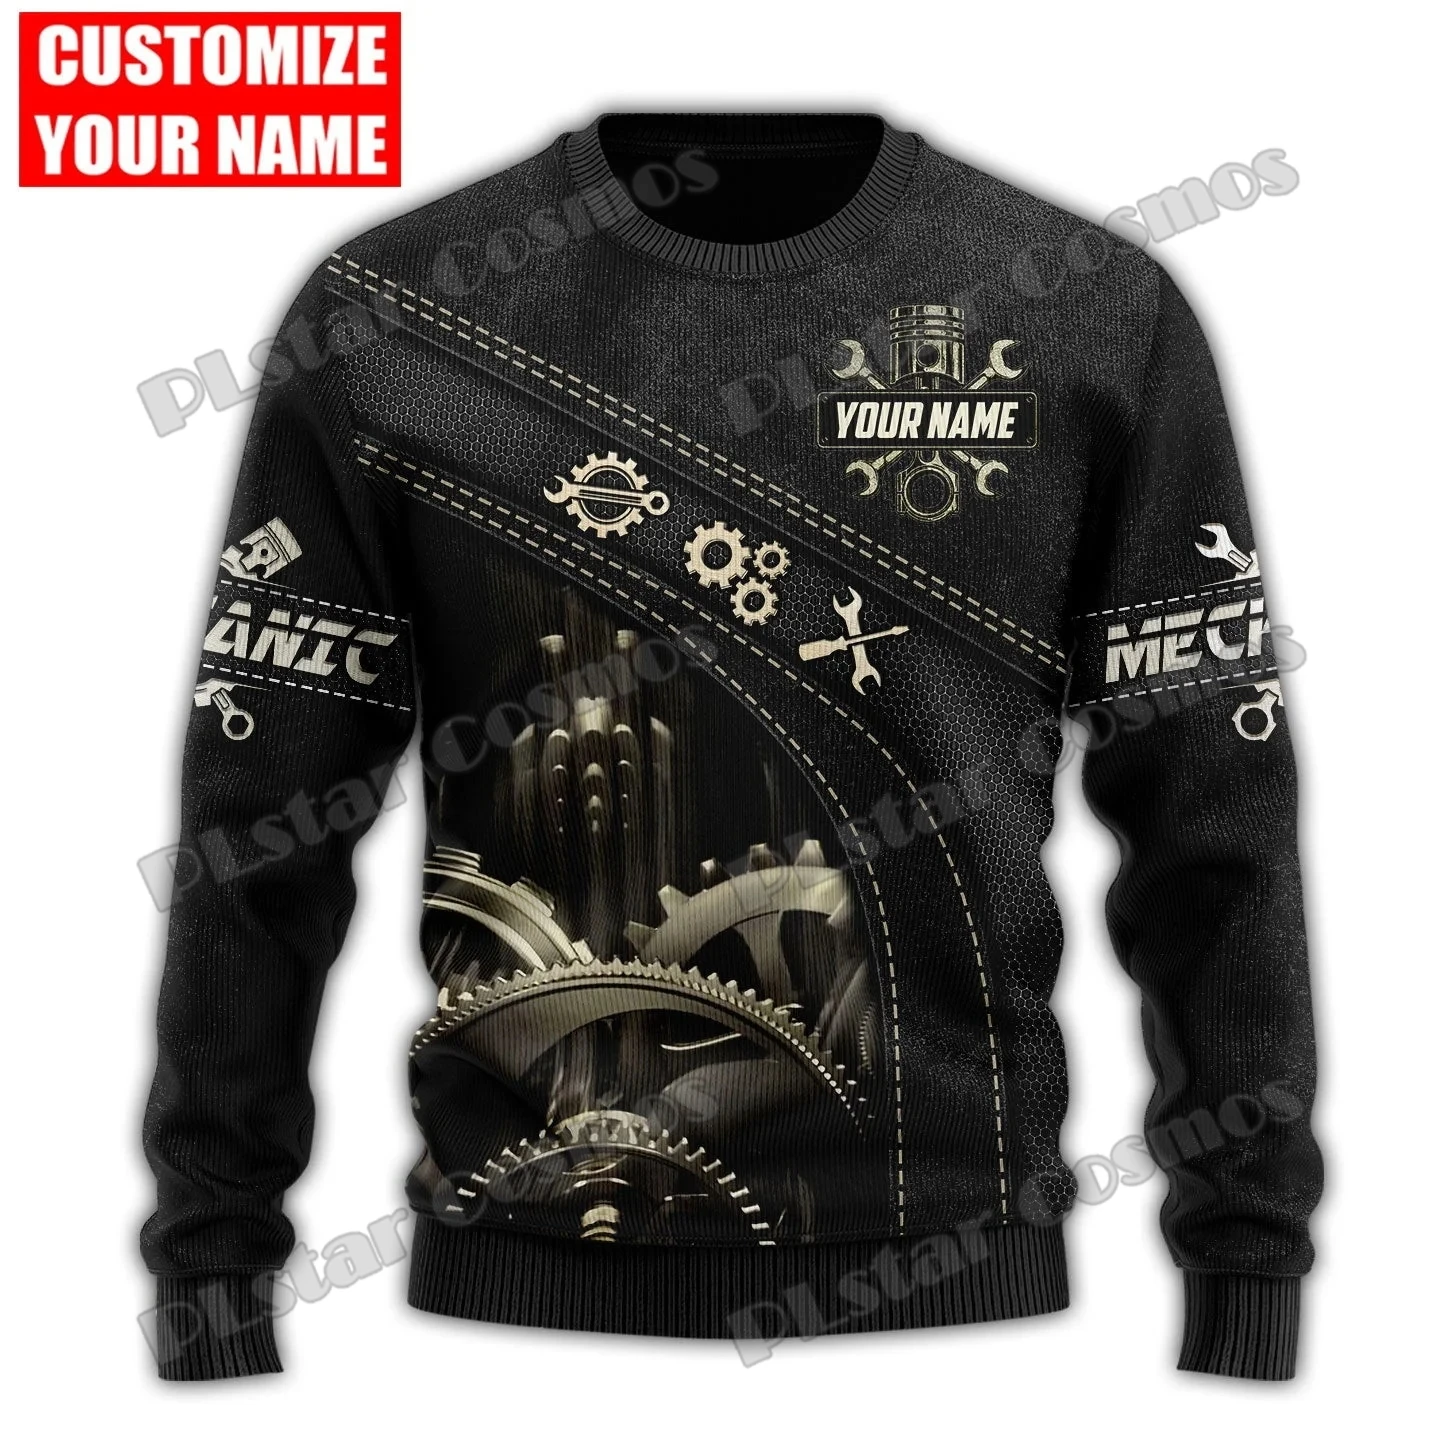 Personalized Name Mechanic Pattern 3D Printed Fashion Men's Ugly Christmas Sweater Winter Unisex Casual Knitwear Pullover MYY48